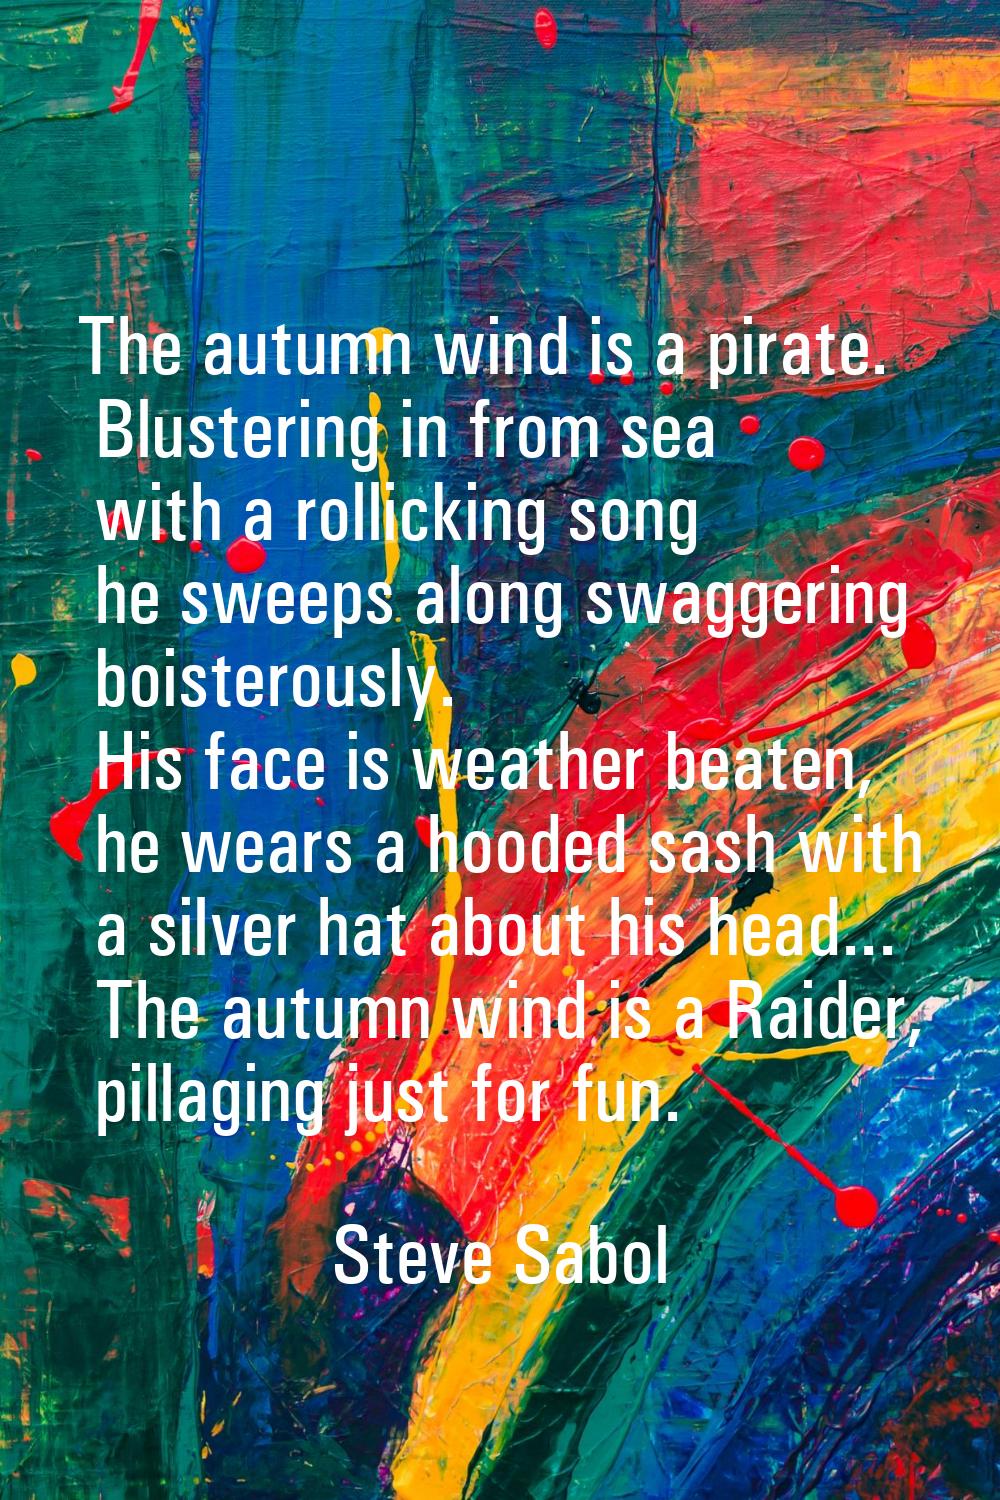 The autumn wind is a pirate. Blustering in from sea with a rollicking song he sweeps along swaggeri